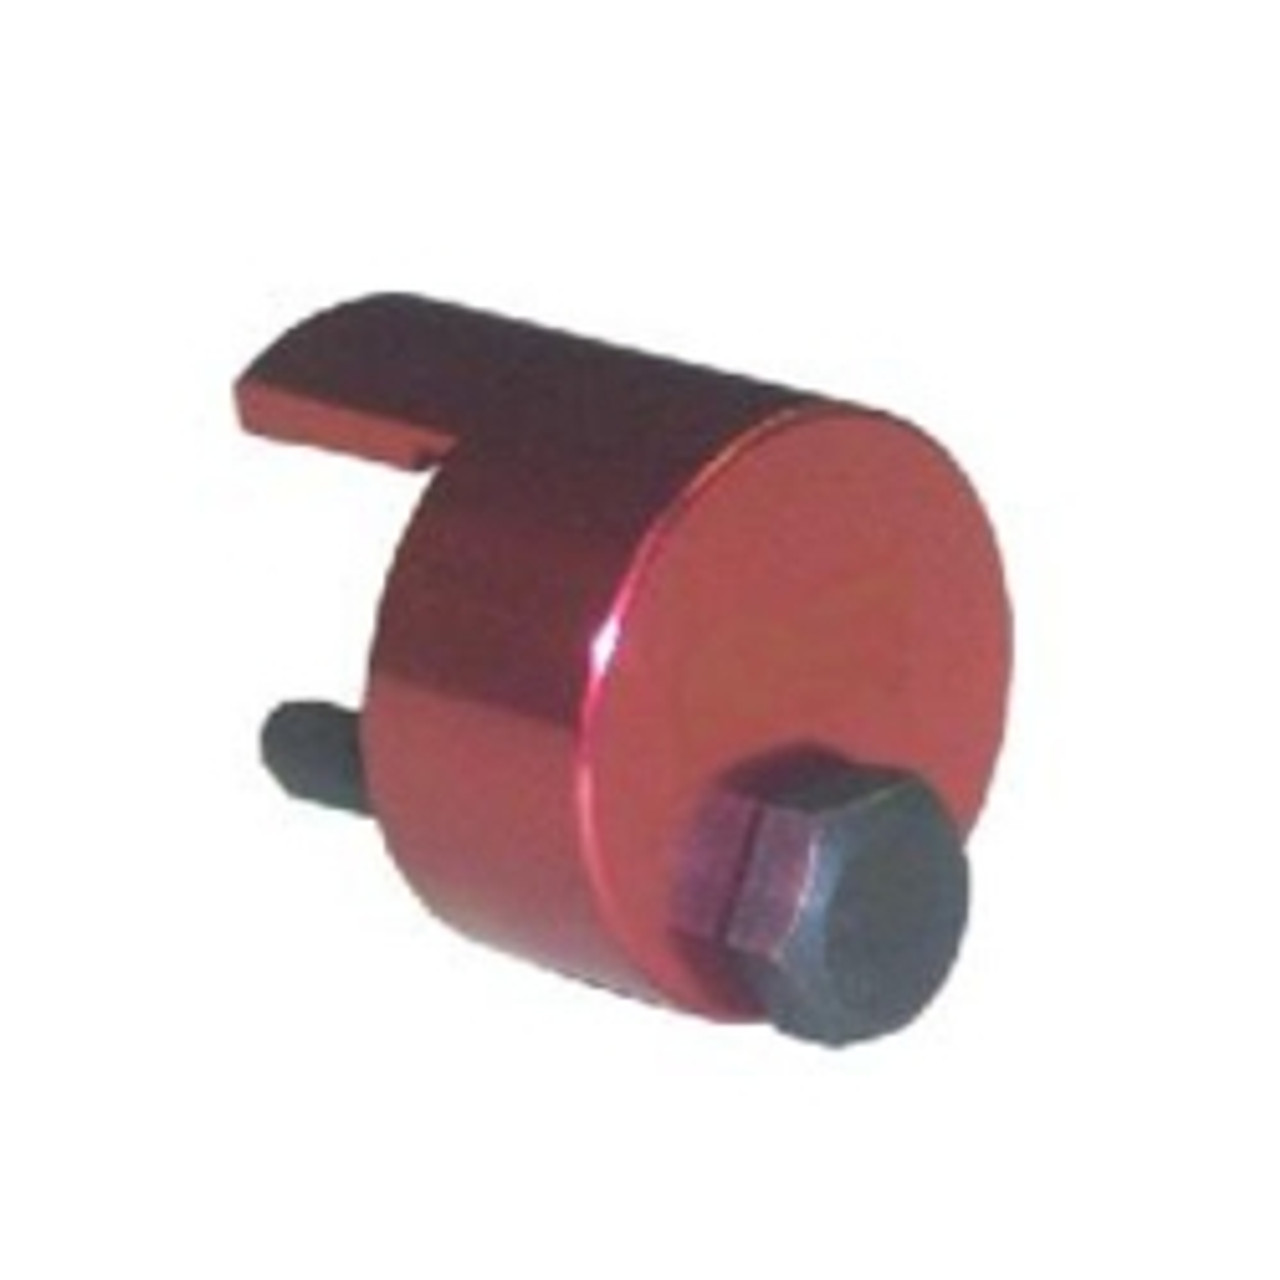 M7 4” Eraser Wheel Tool Replacement 4000 RPM For Surface Cleaning